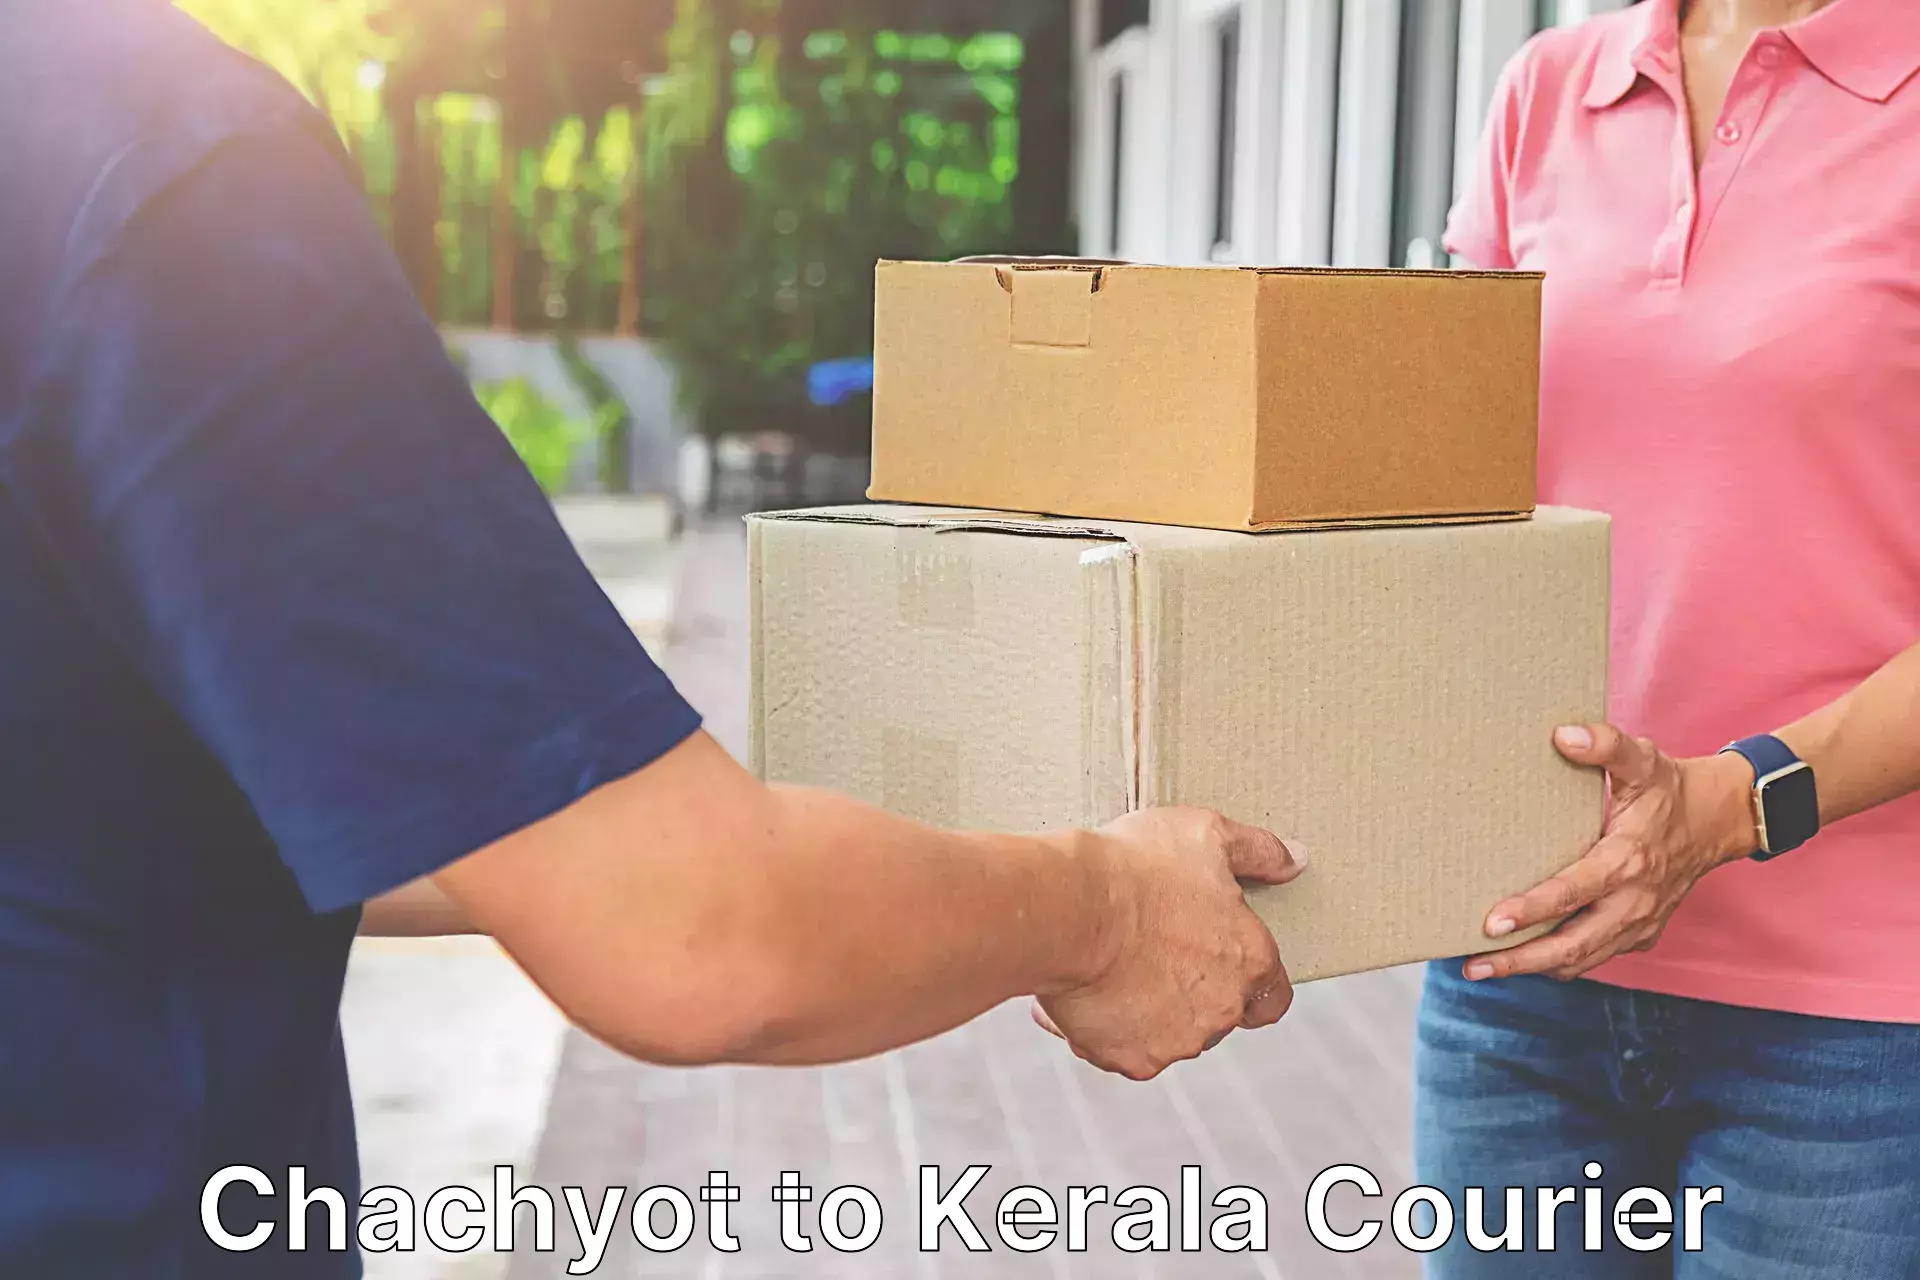 24-hour courier service Chachyot to Cochin Port Kochi